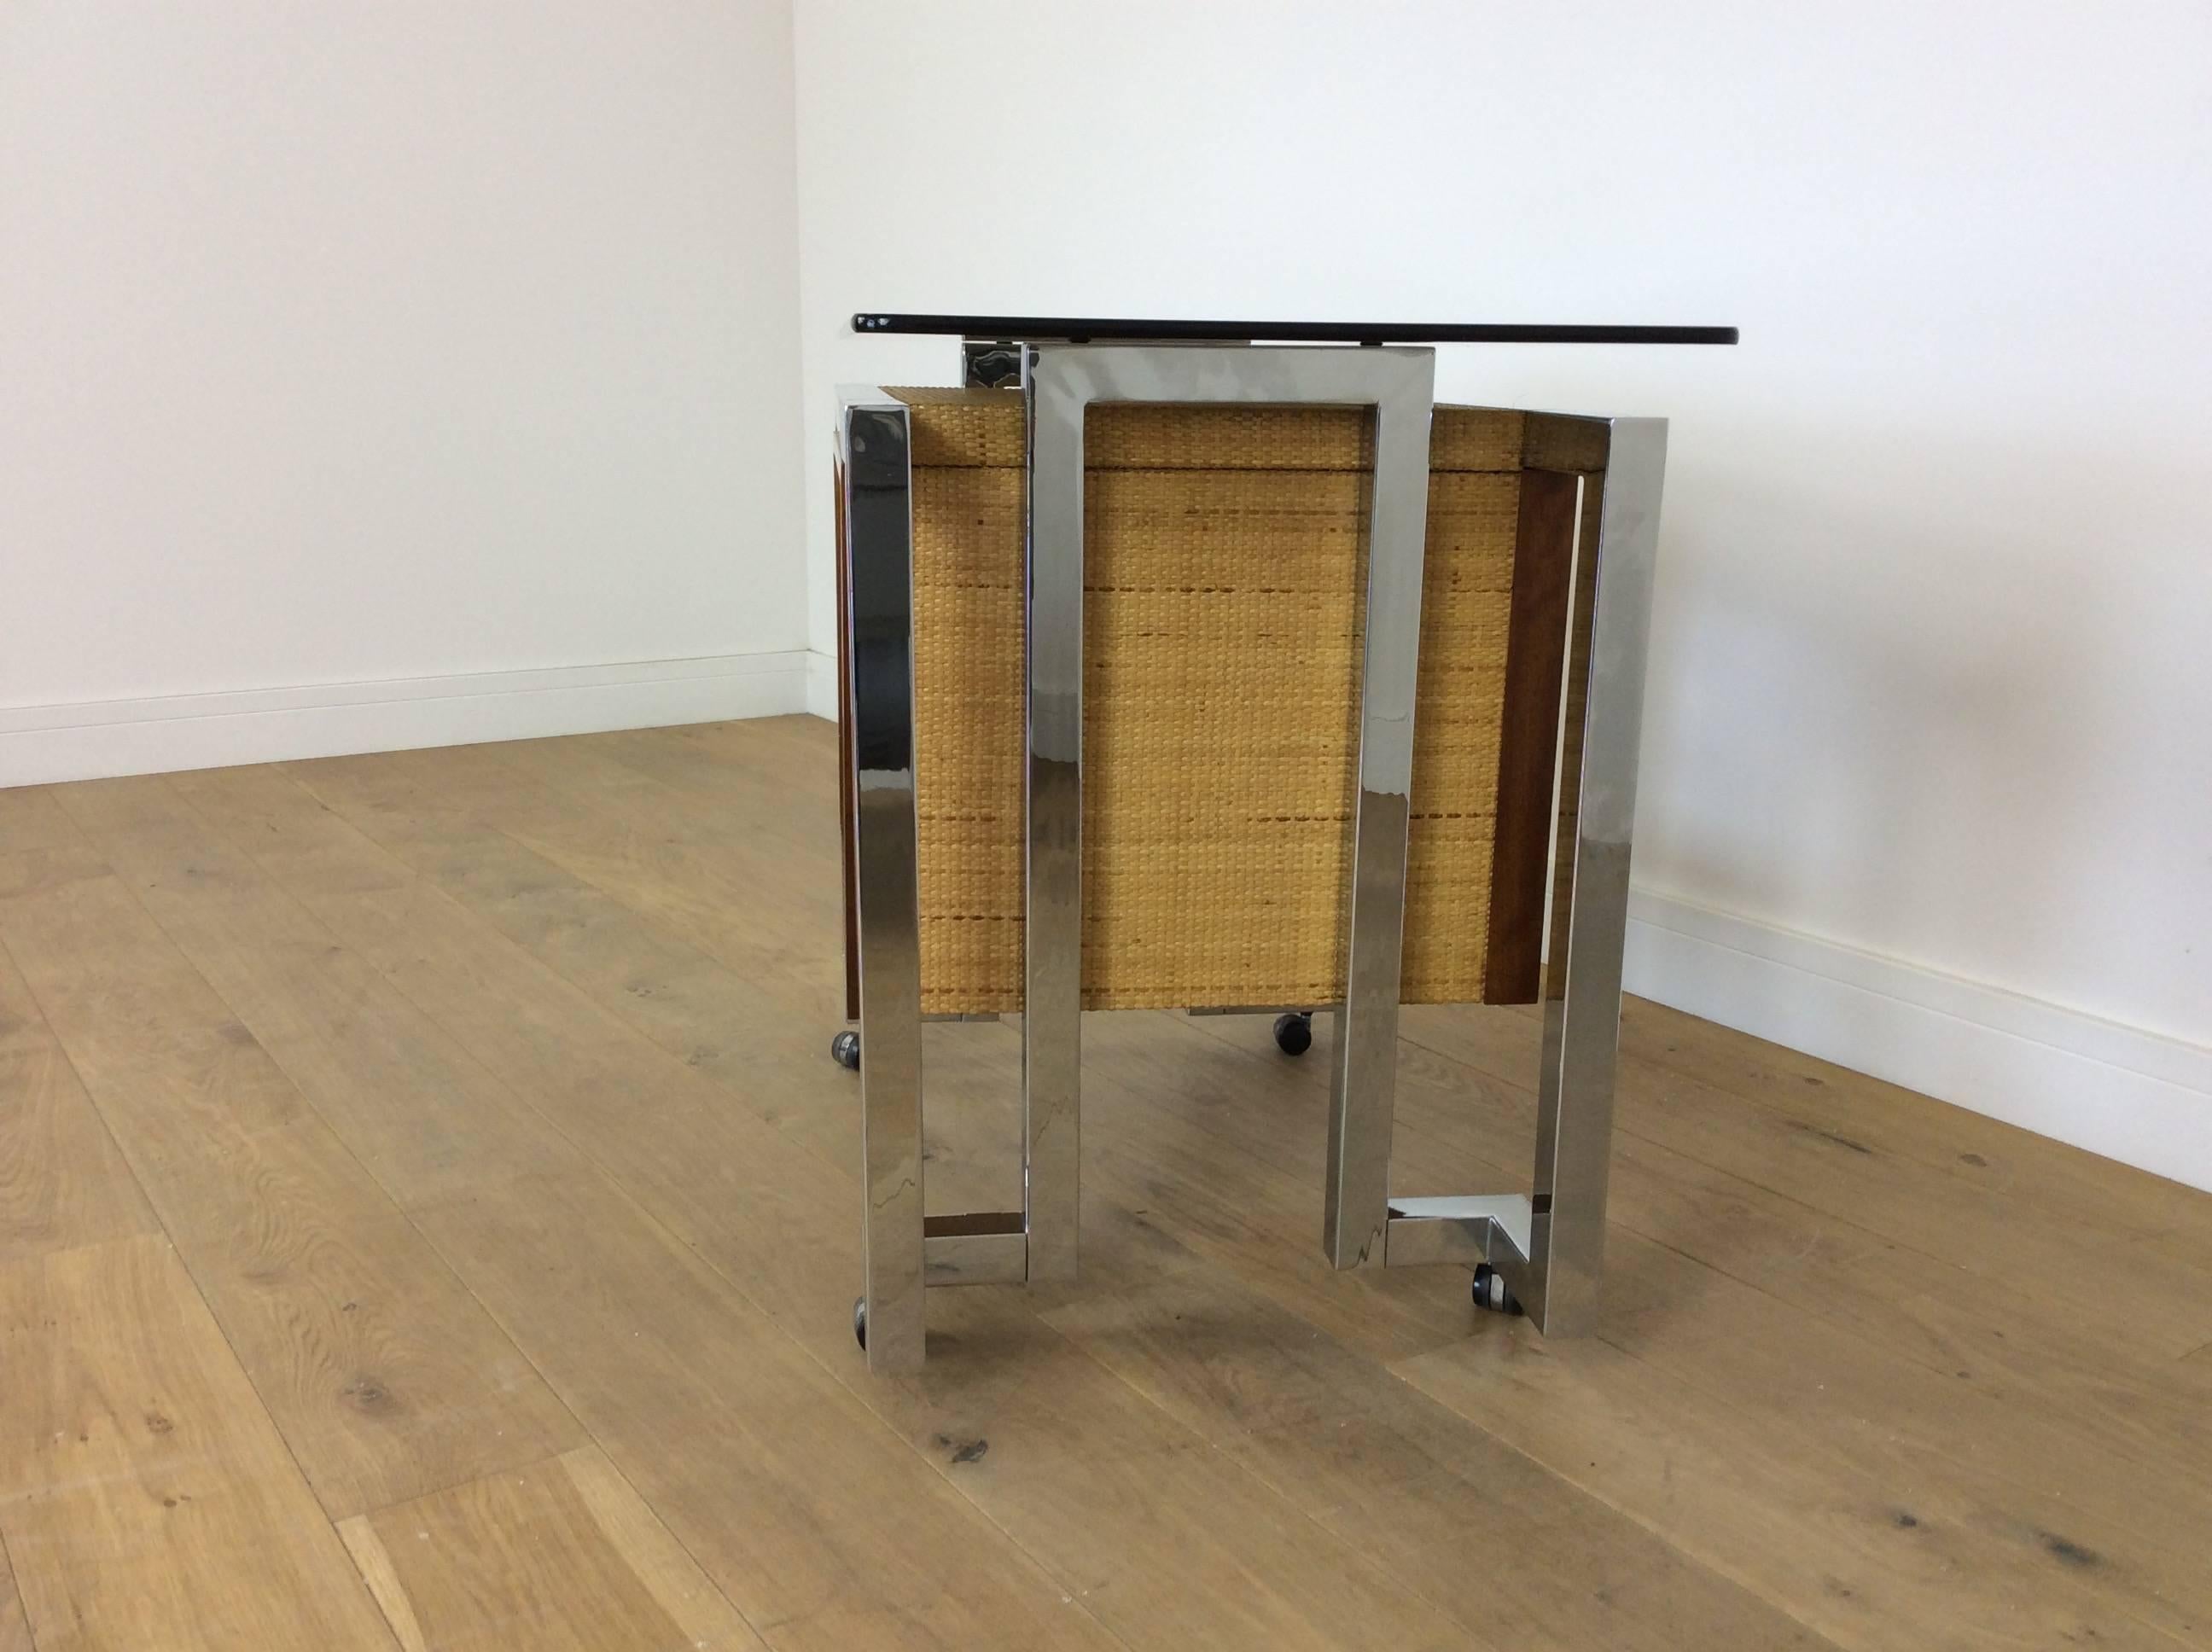 Chrome Midcentury Bar Cart Designed by Tim Bates for Pieff